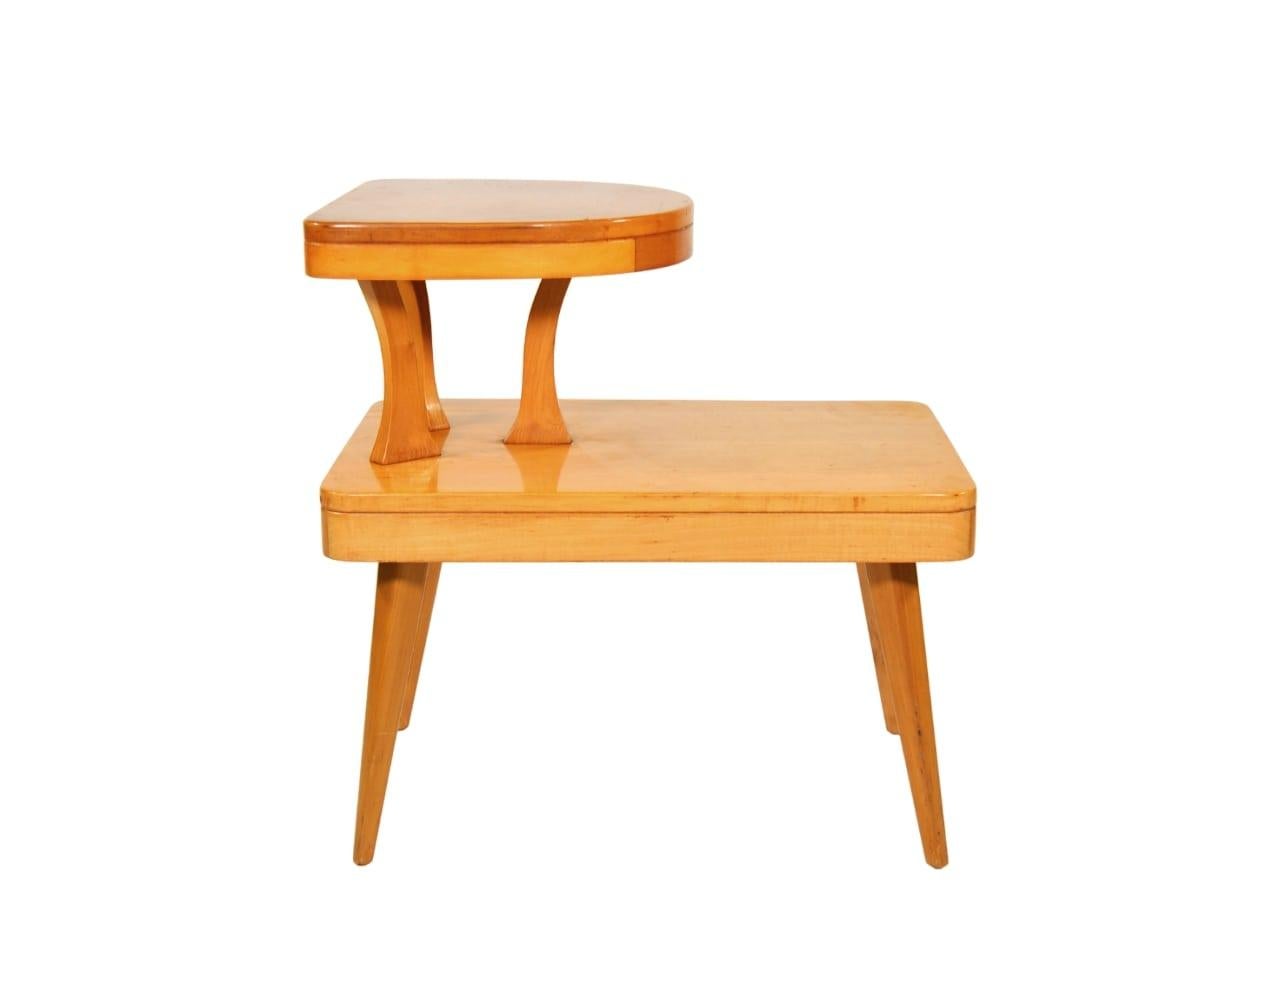 Rare original Art Deco two-tier blonde occasional table attributed to Jindrich Halabala for Spojene Up Závody. The vintage end table features a two-tiered design with rounded edges. This step table has a truly unique shape and silhouette! 